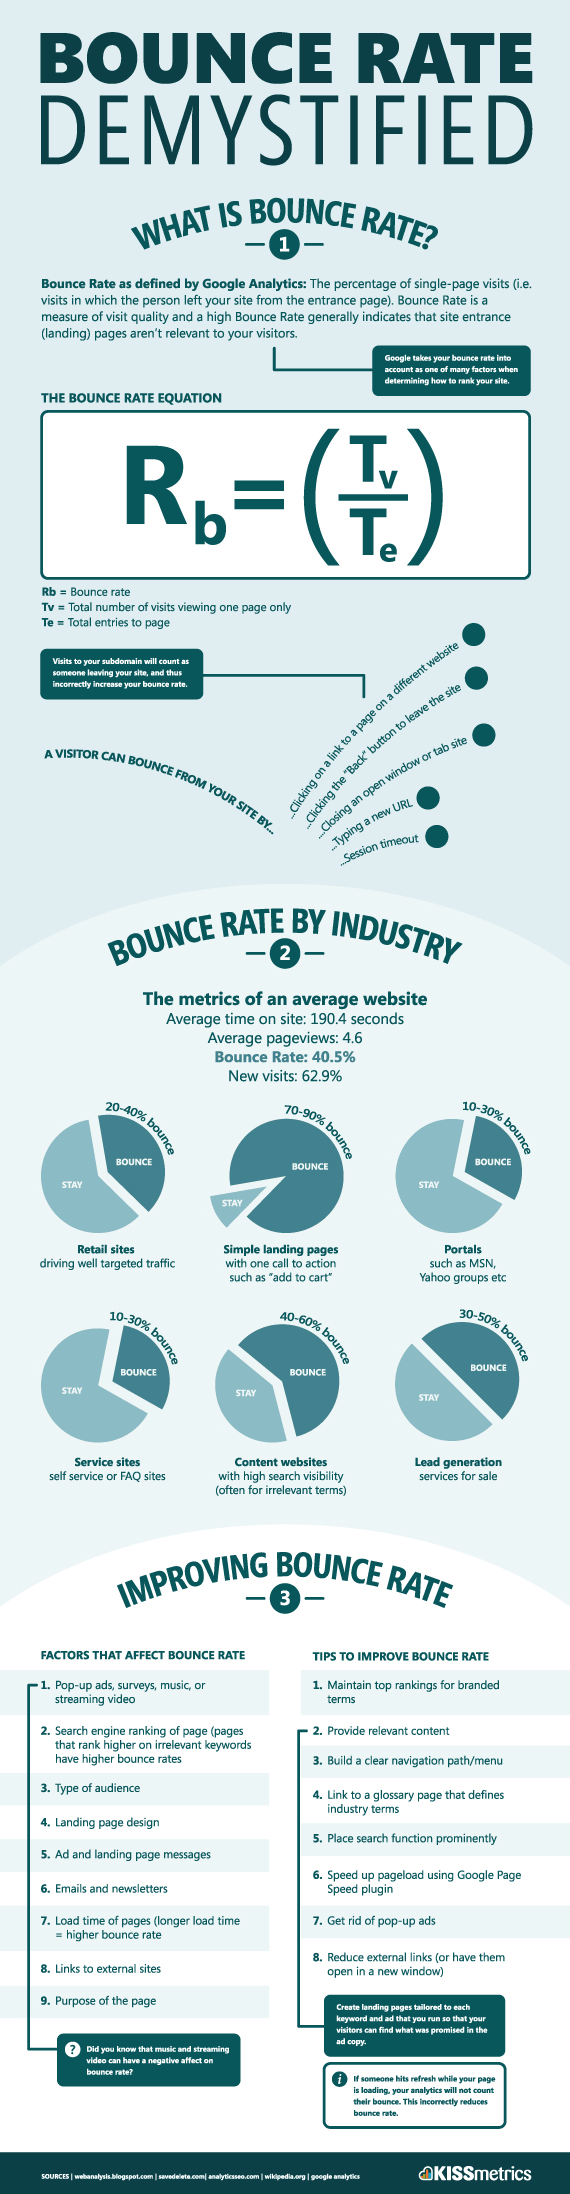 Bounce Rate demystified infographic 